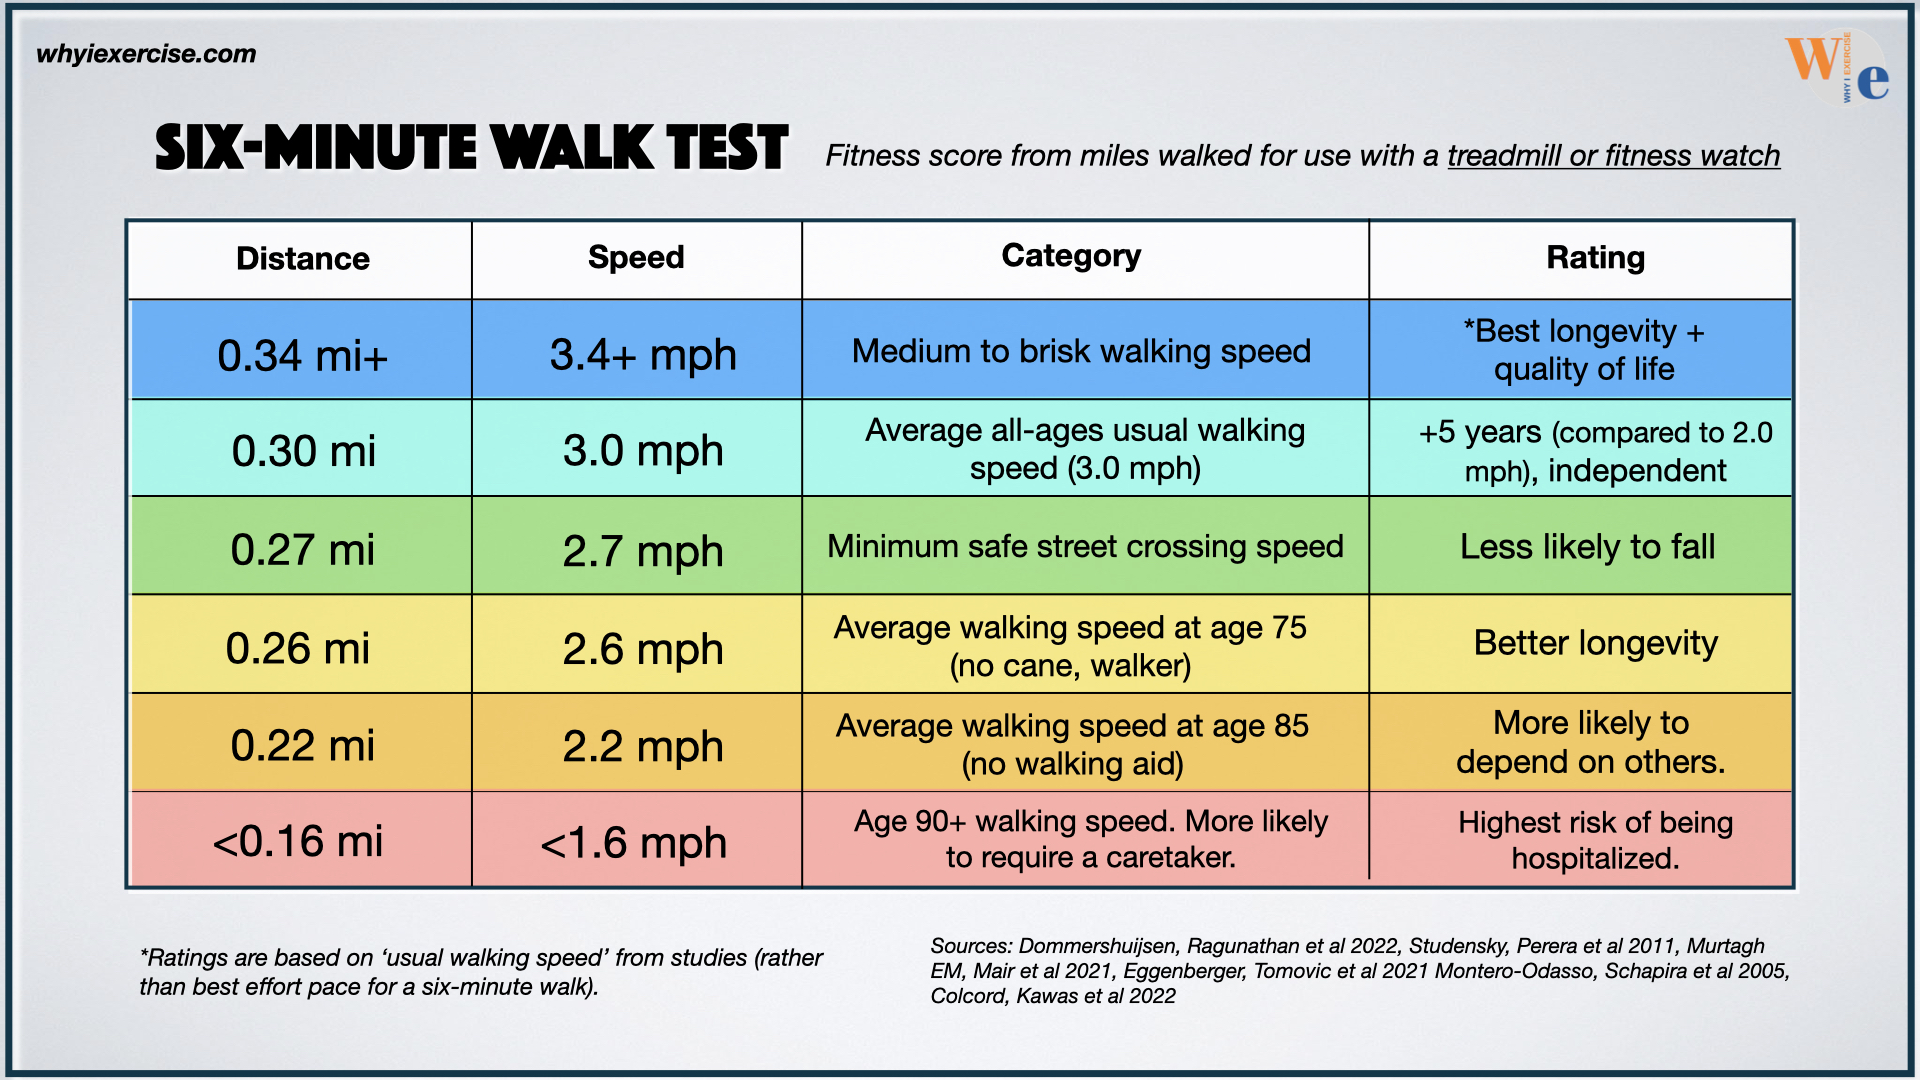 six minute walk test score chart.  Use with treadmill or fitness watch.